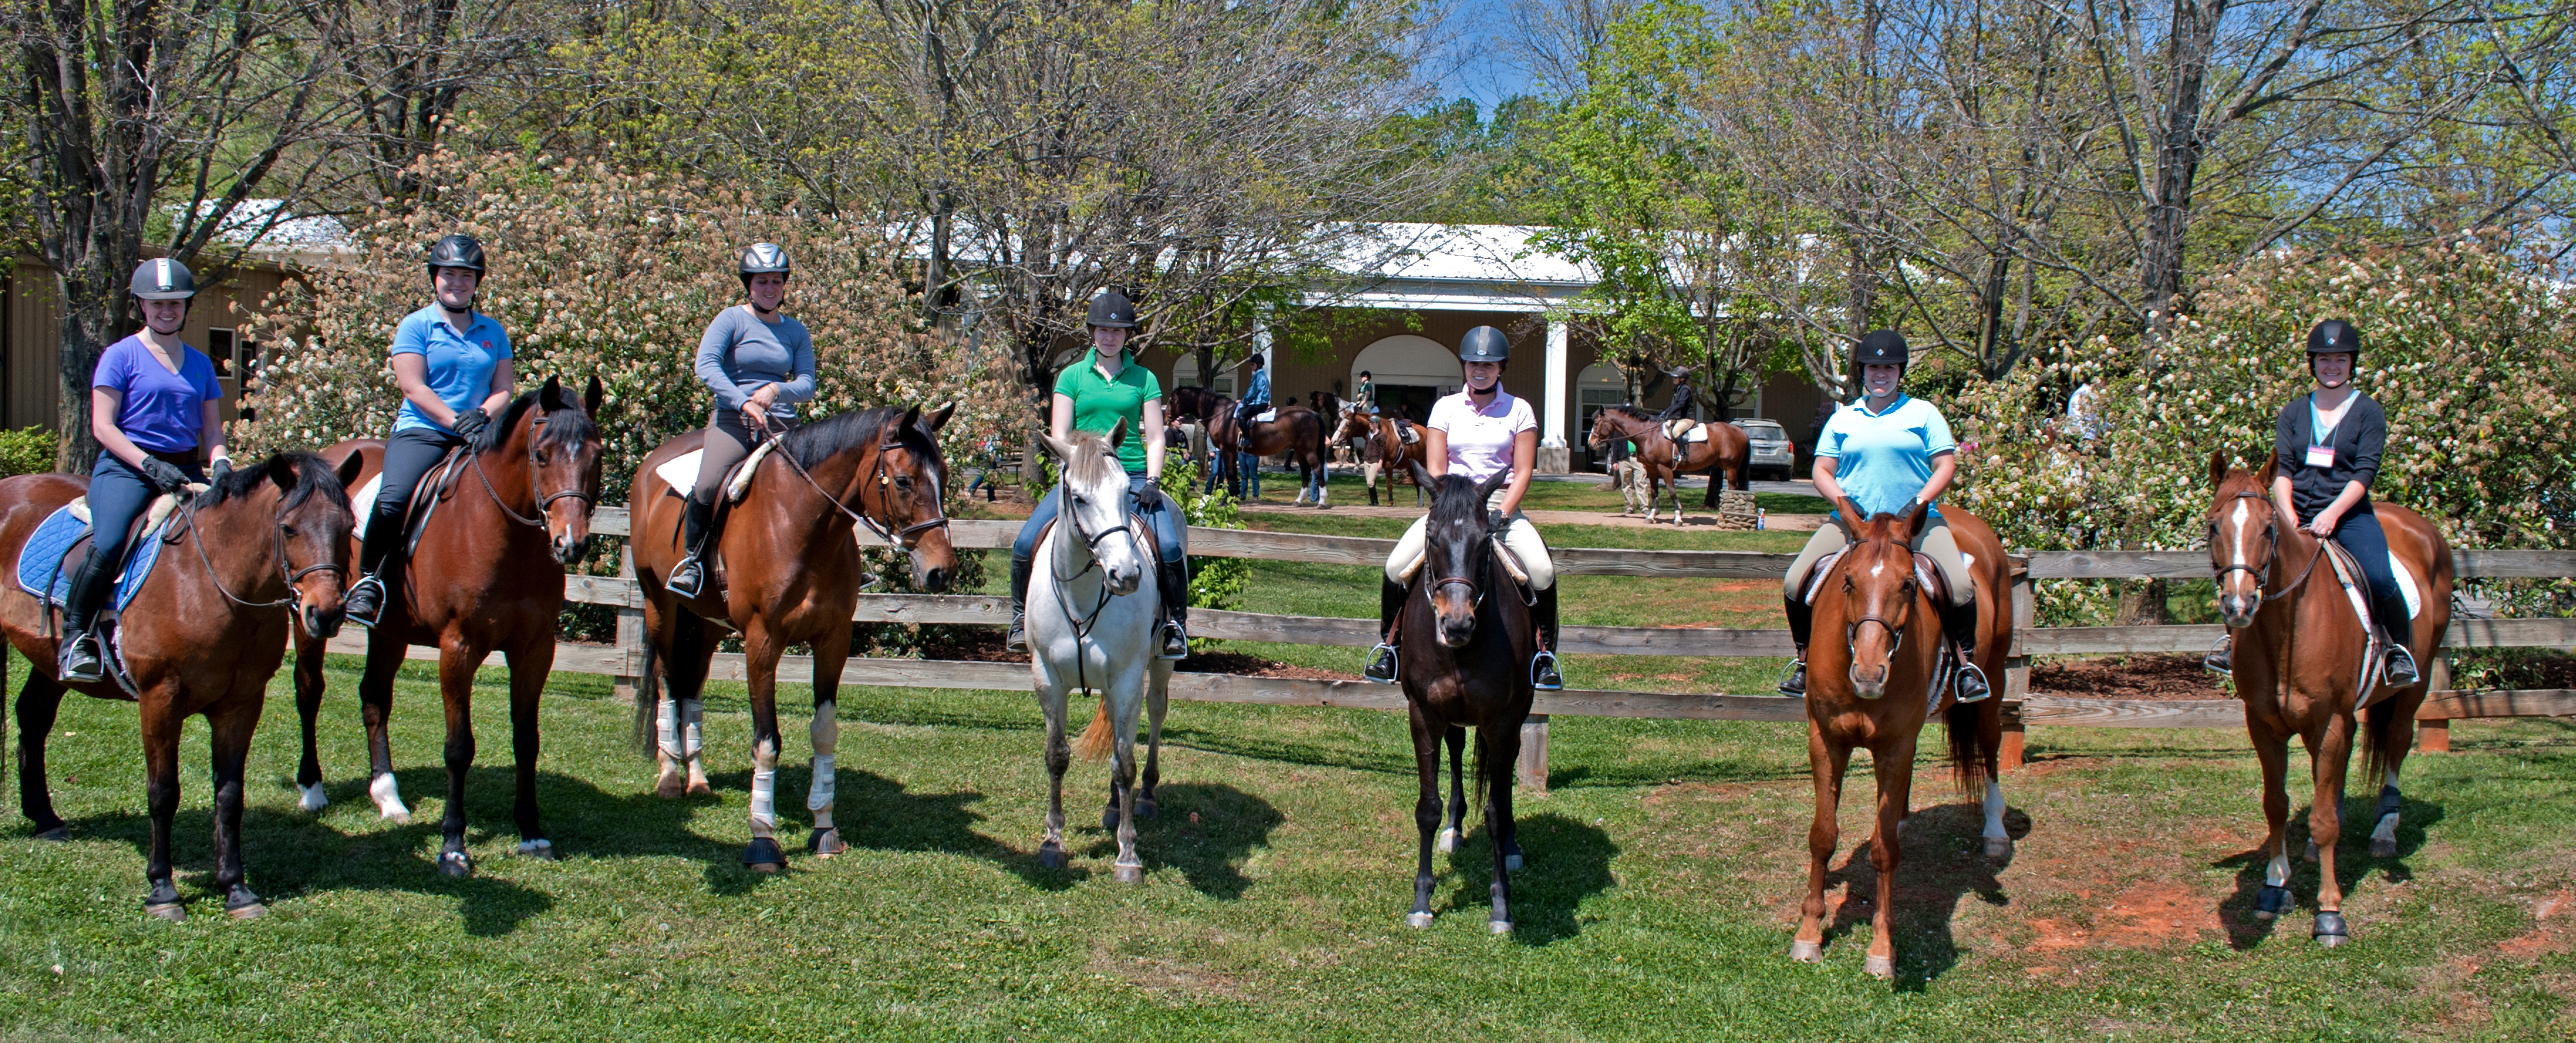 Alumnae riders found themselves back in the saddle at the 2012 Sweet Briar College reunion. (Photo by Margret Wood '13)